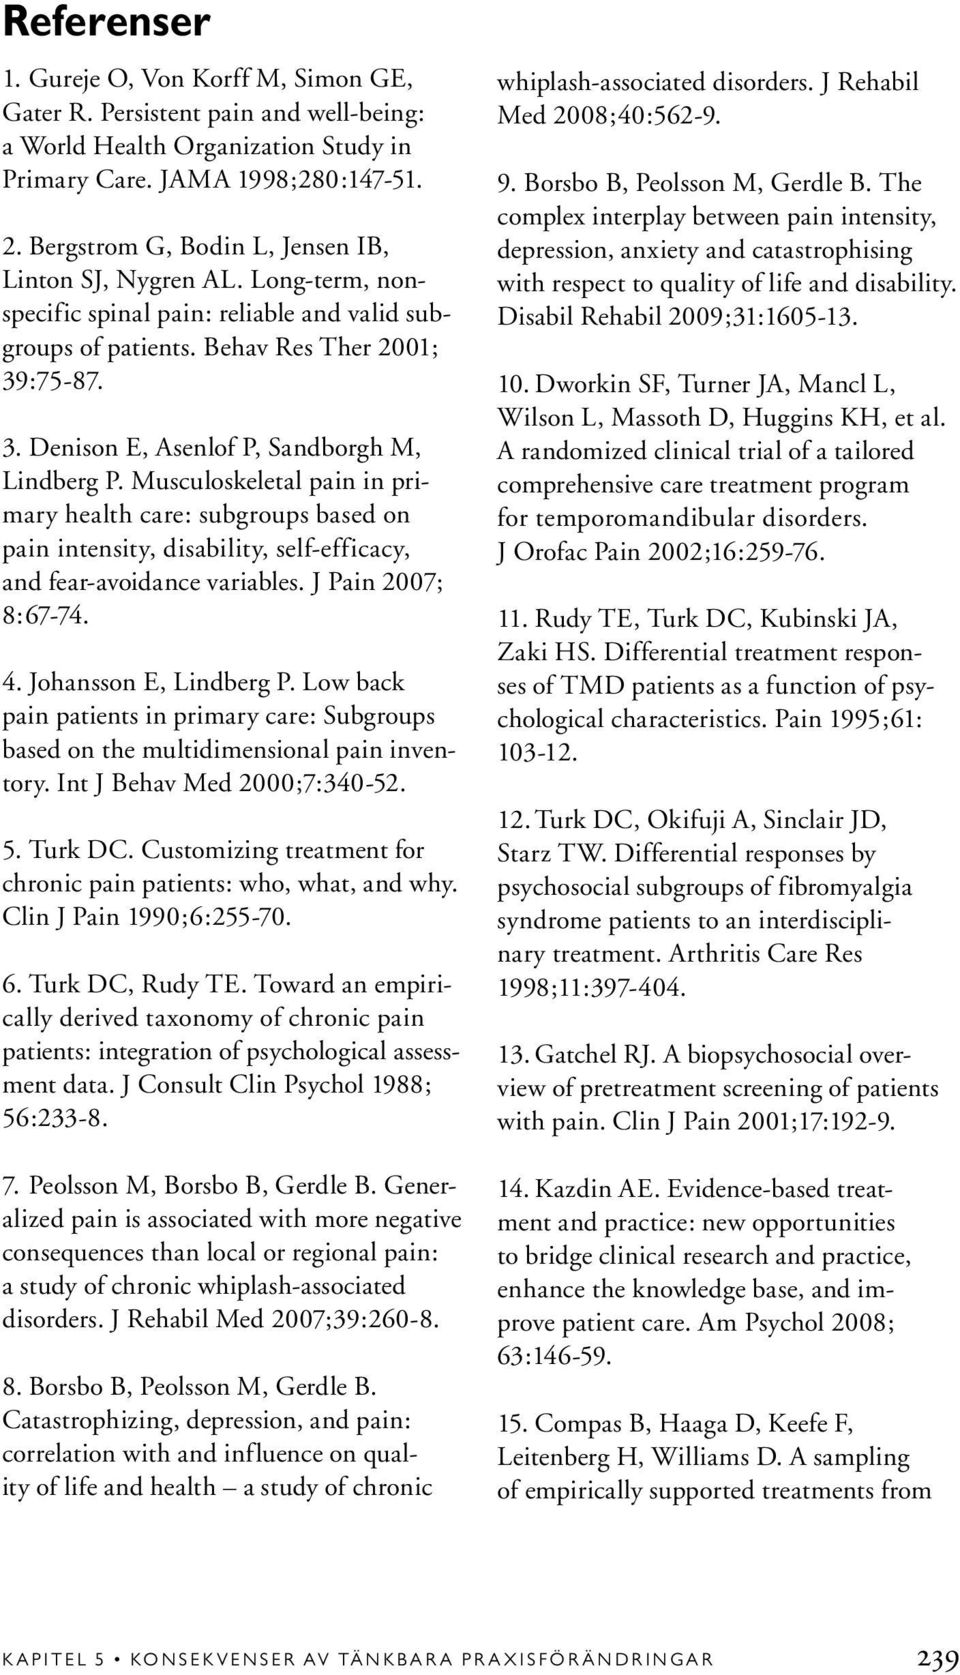 :75-87. 3. Denison E, Asenlof P, Sandborgh M, Lindberg P. Musculoskeletal pain in primary health care: subgroups based on pain intensity, disability, self-efficacy, and fear-avoidance variables.